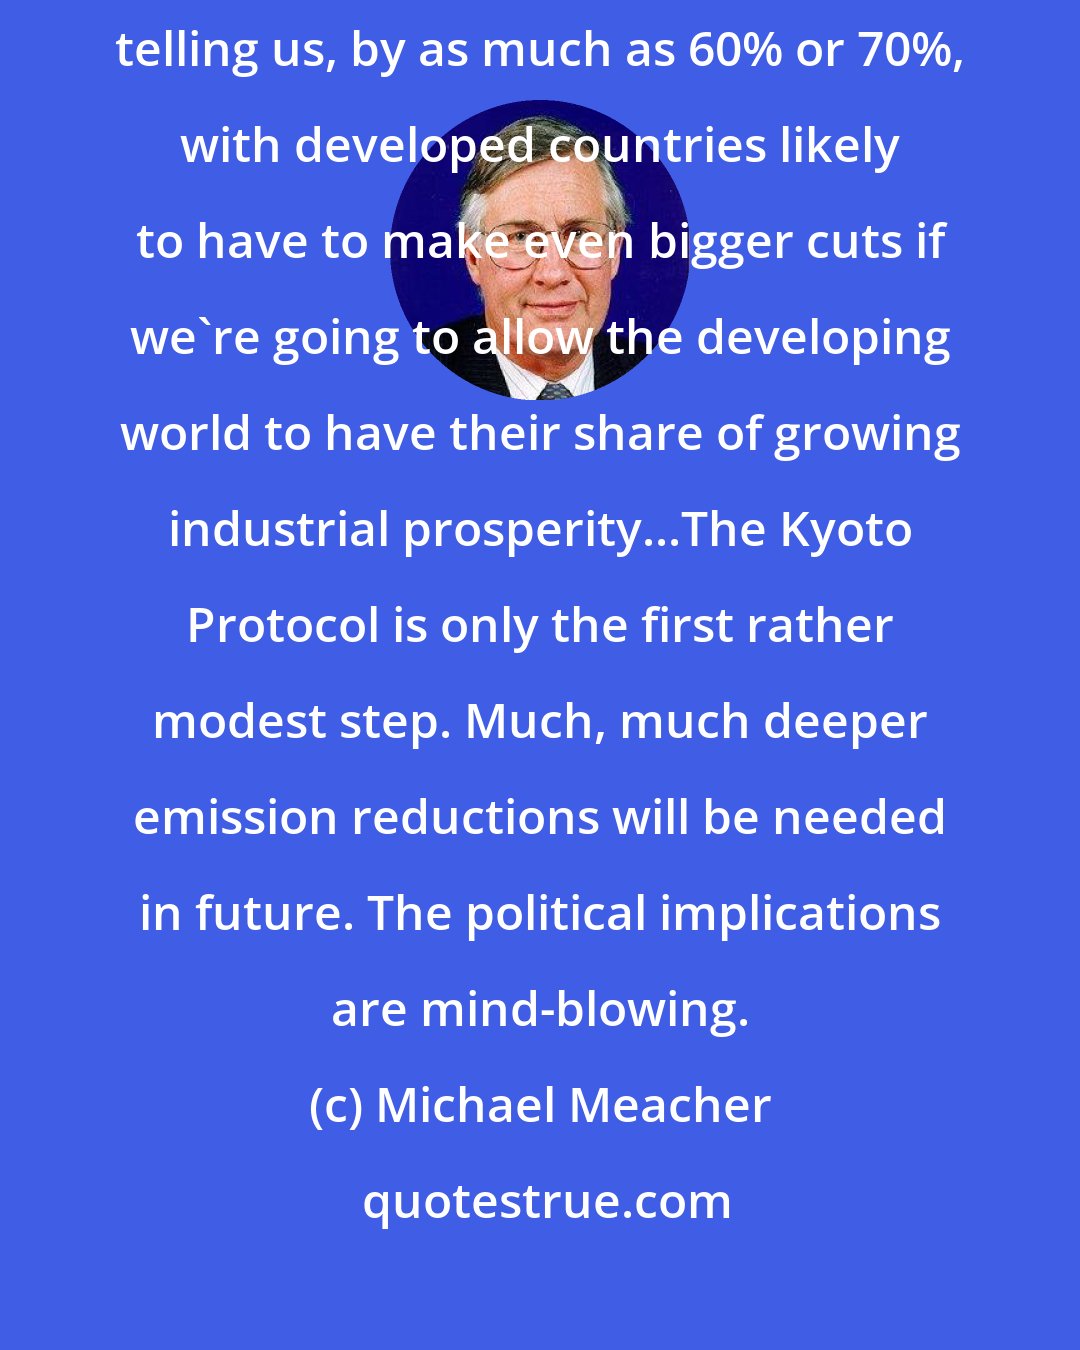 Michael Meacher: Globally, emissions may have to be reduced, the scientists are telling us, by as much as 60% or 70%, with developed countries likely to have to make even bigger cuts if we're going to allow the developing world to have their share of growing industrial prosperity...The Kyoto Protocol is only the first rather modest step. Much, much deeper emission reductions will be needed in future. The political implications are mind-blowing.